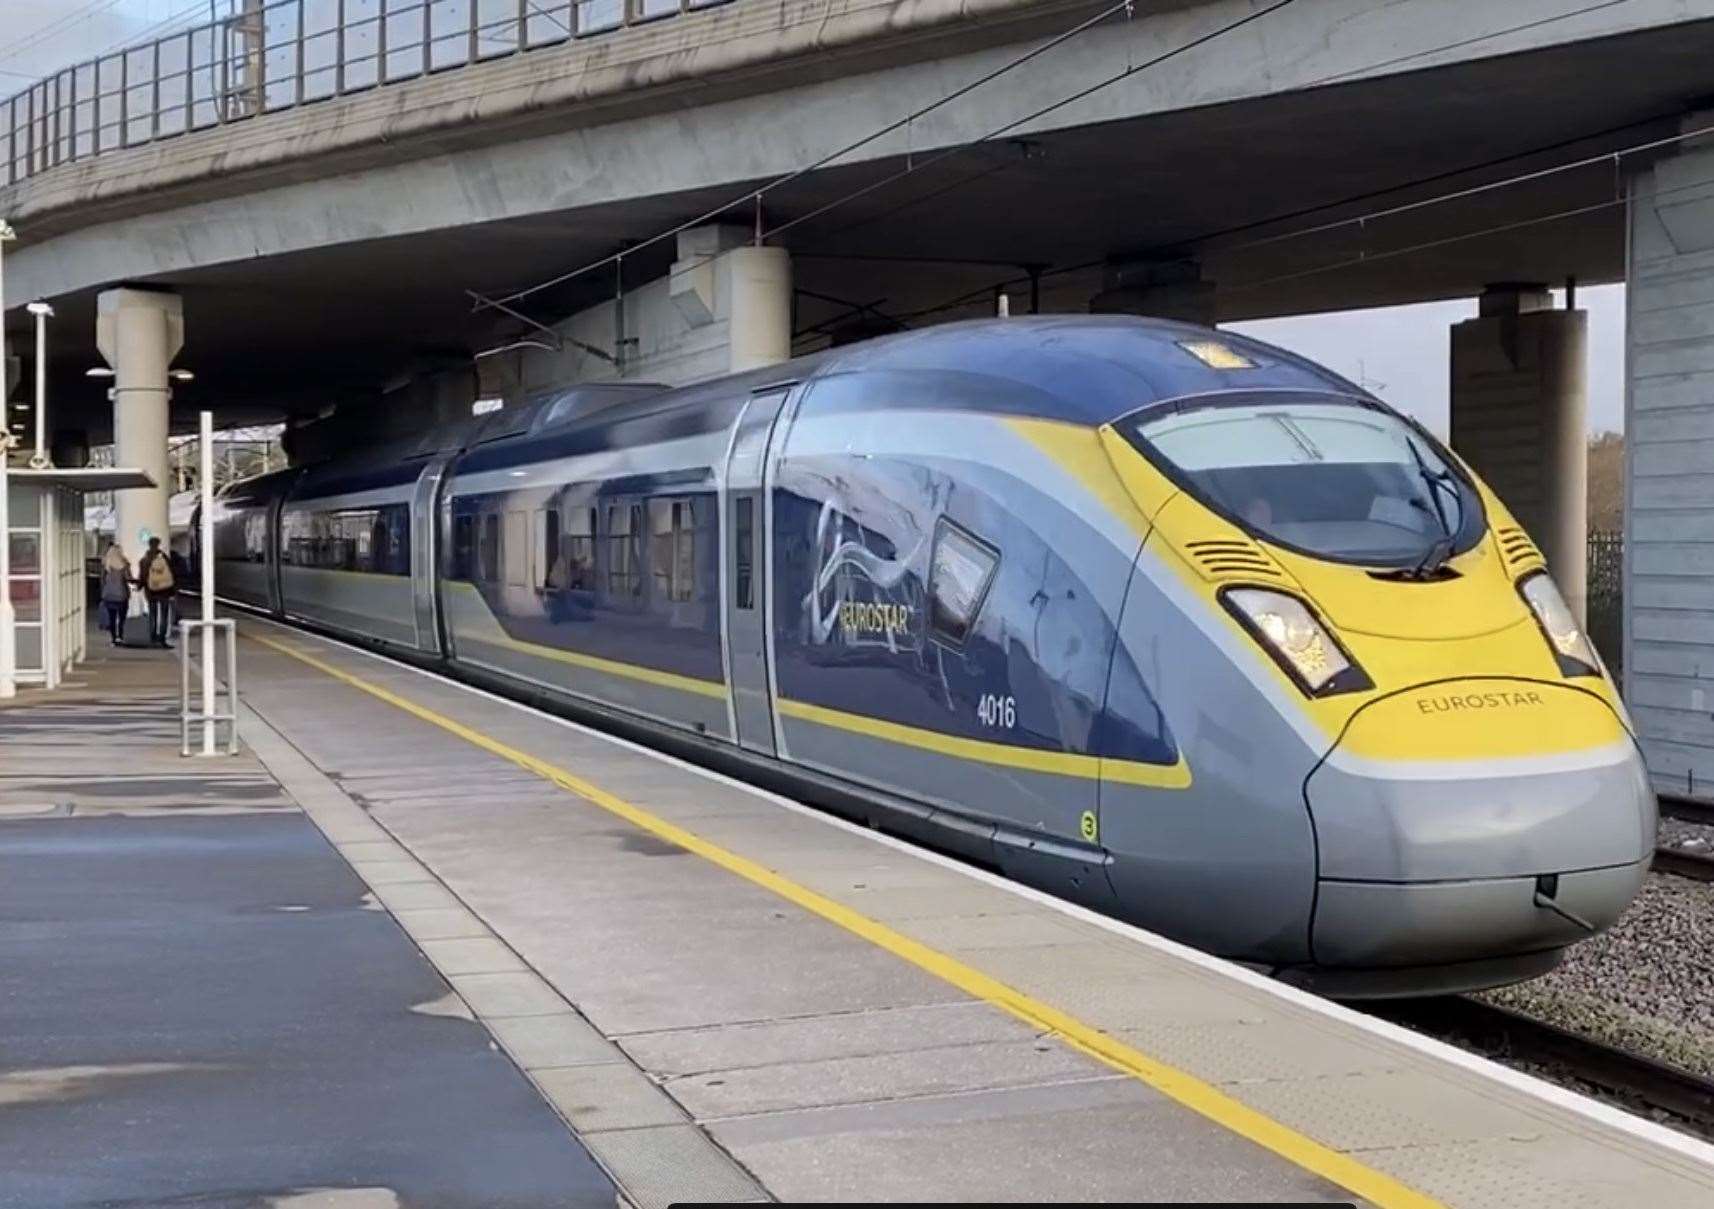 Eurostar could reportedly fold as early as April. Picture: Steve Salter